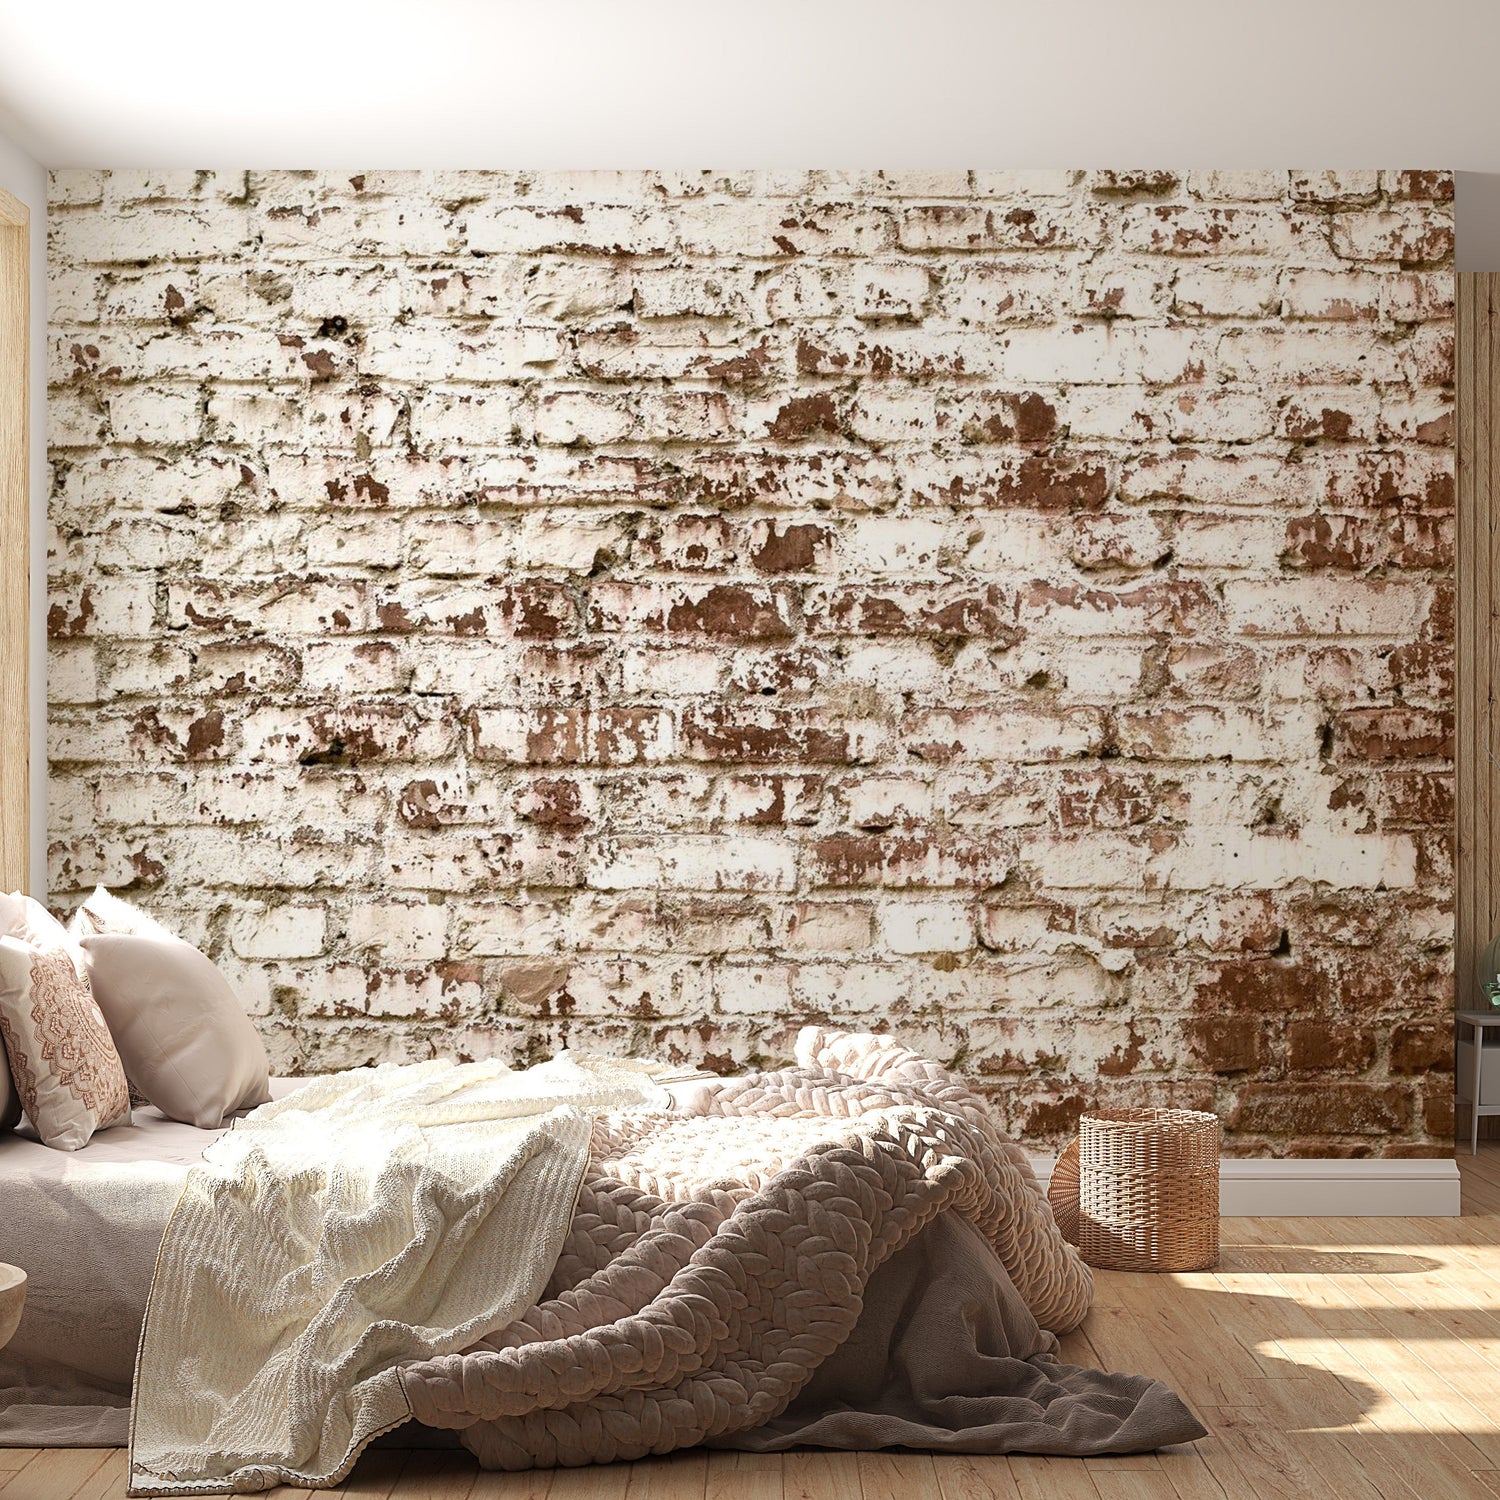 Peel & Stick Wall Mural - Old Farm Bricks - Removable Wall Decals